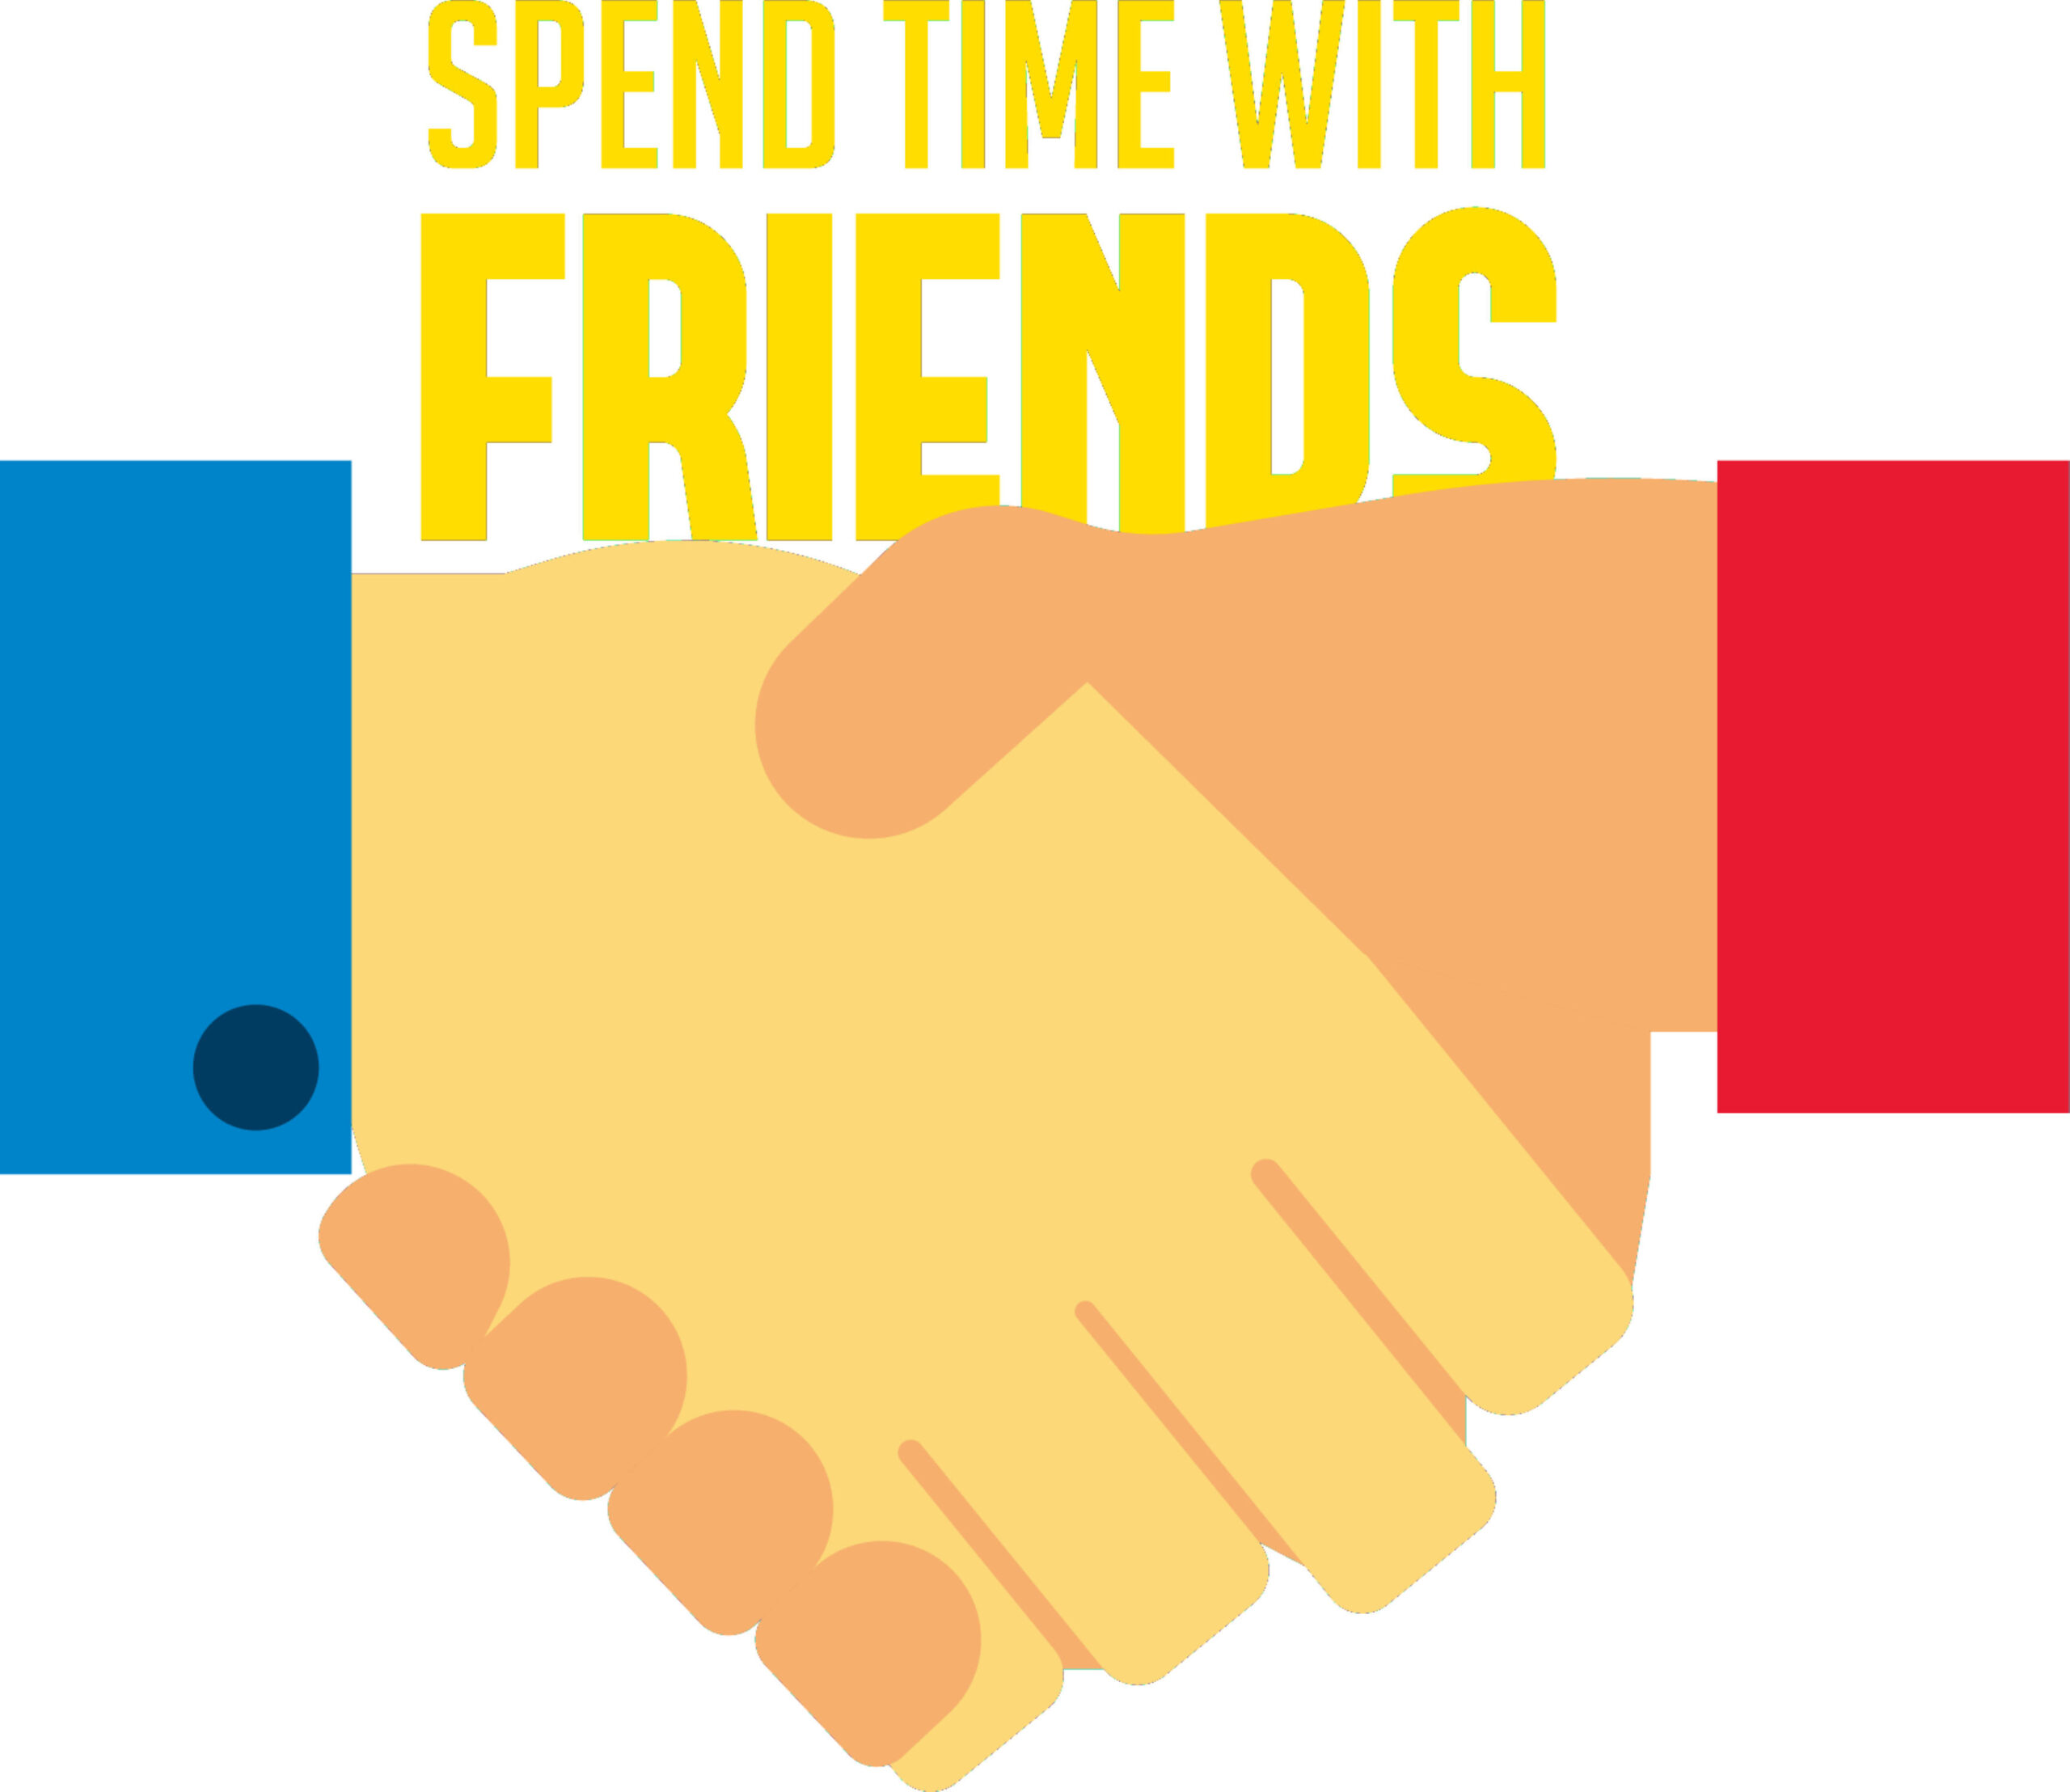 Spend time with friends design